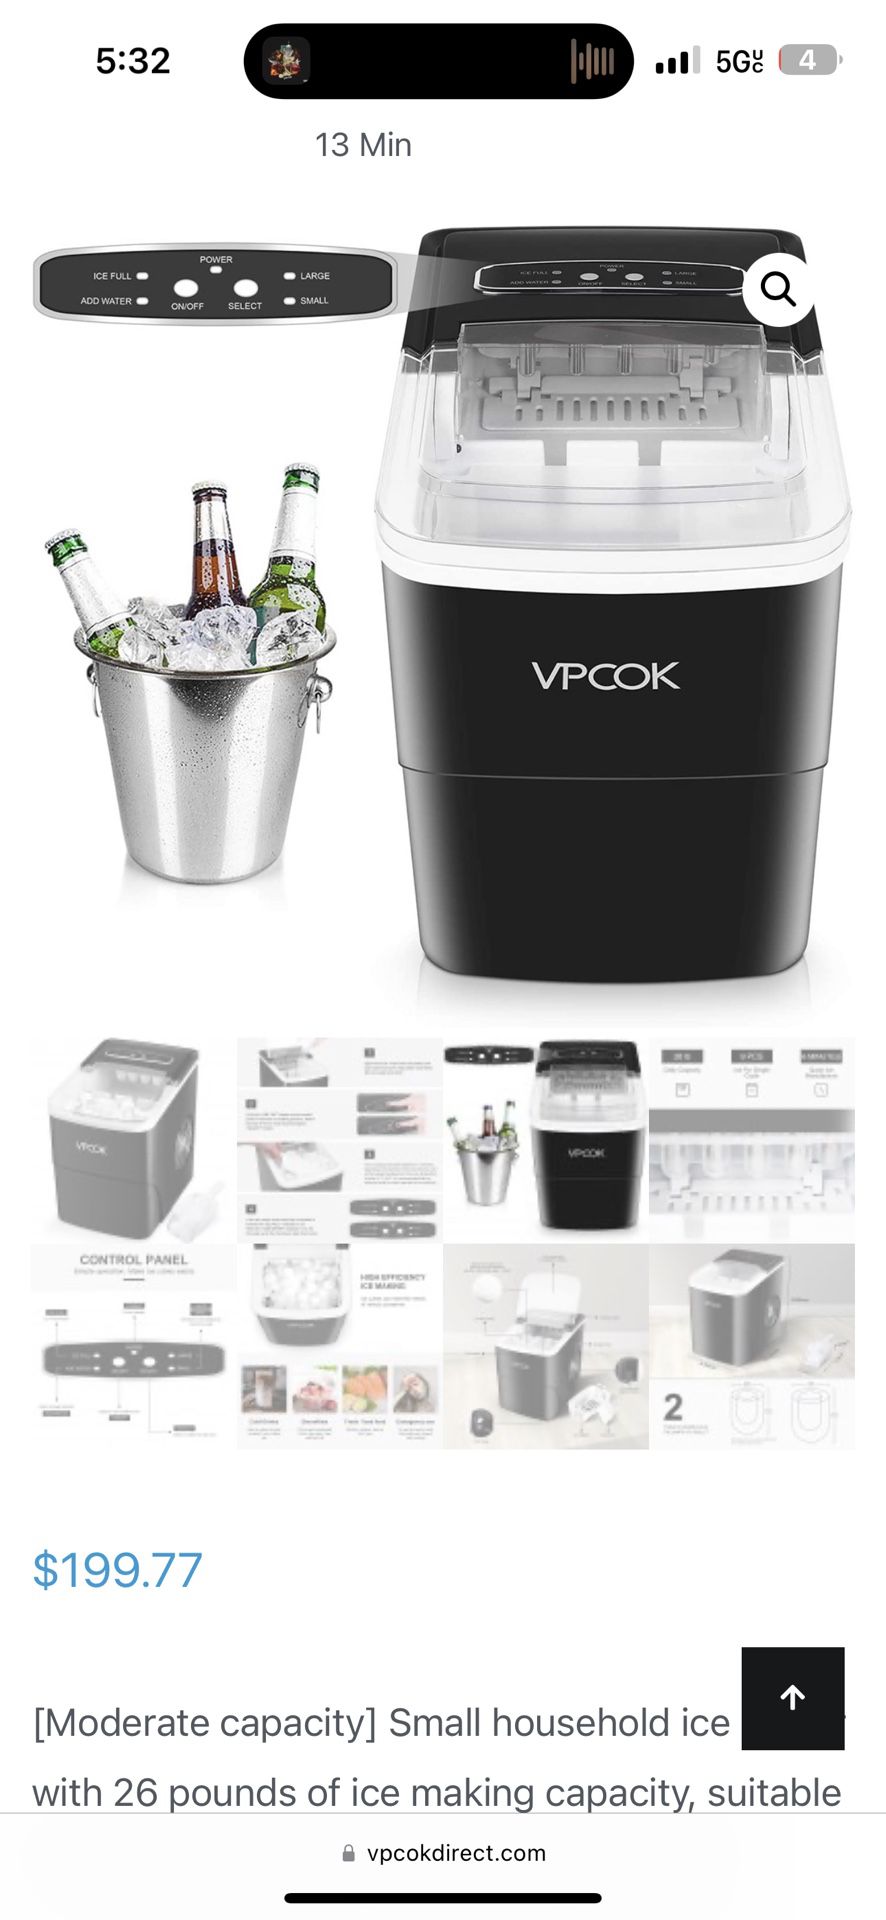 Vpcok Ice maker Counter Top Portable With Ice Spoon And Basket 26 Lbs In 24 Hours 2 Ice Sizes New In Box.